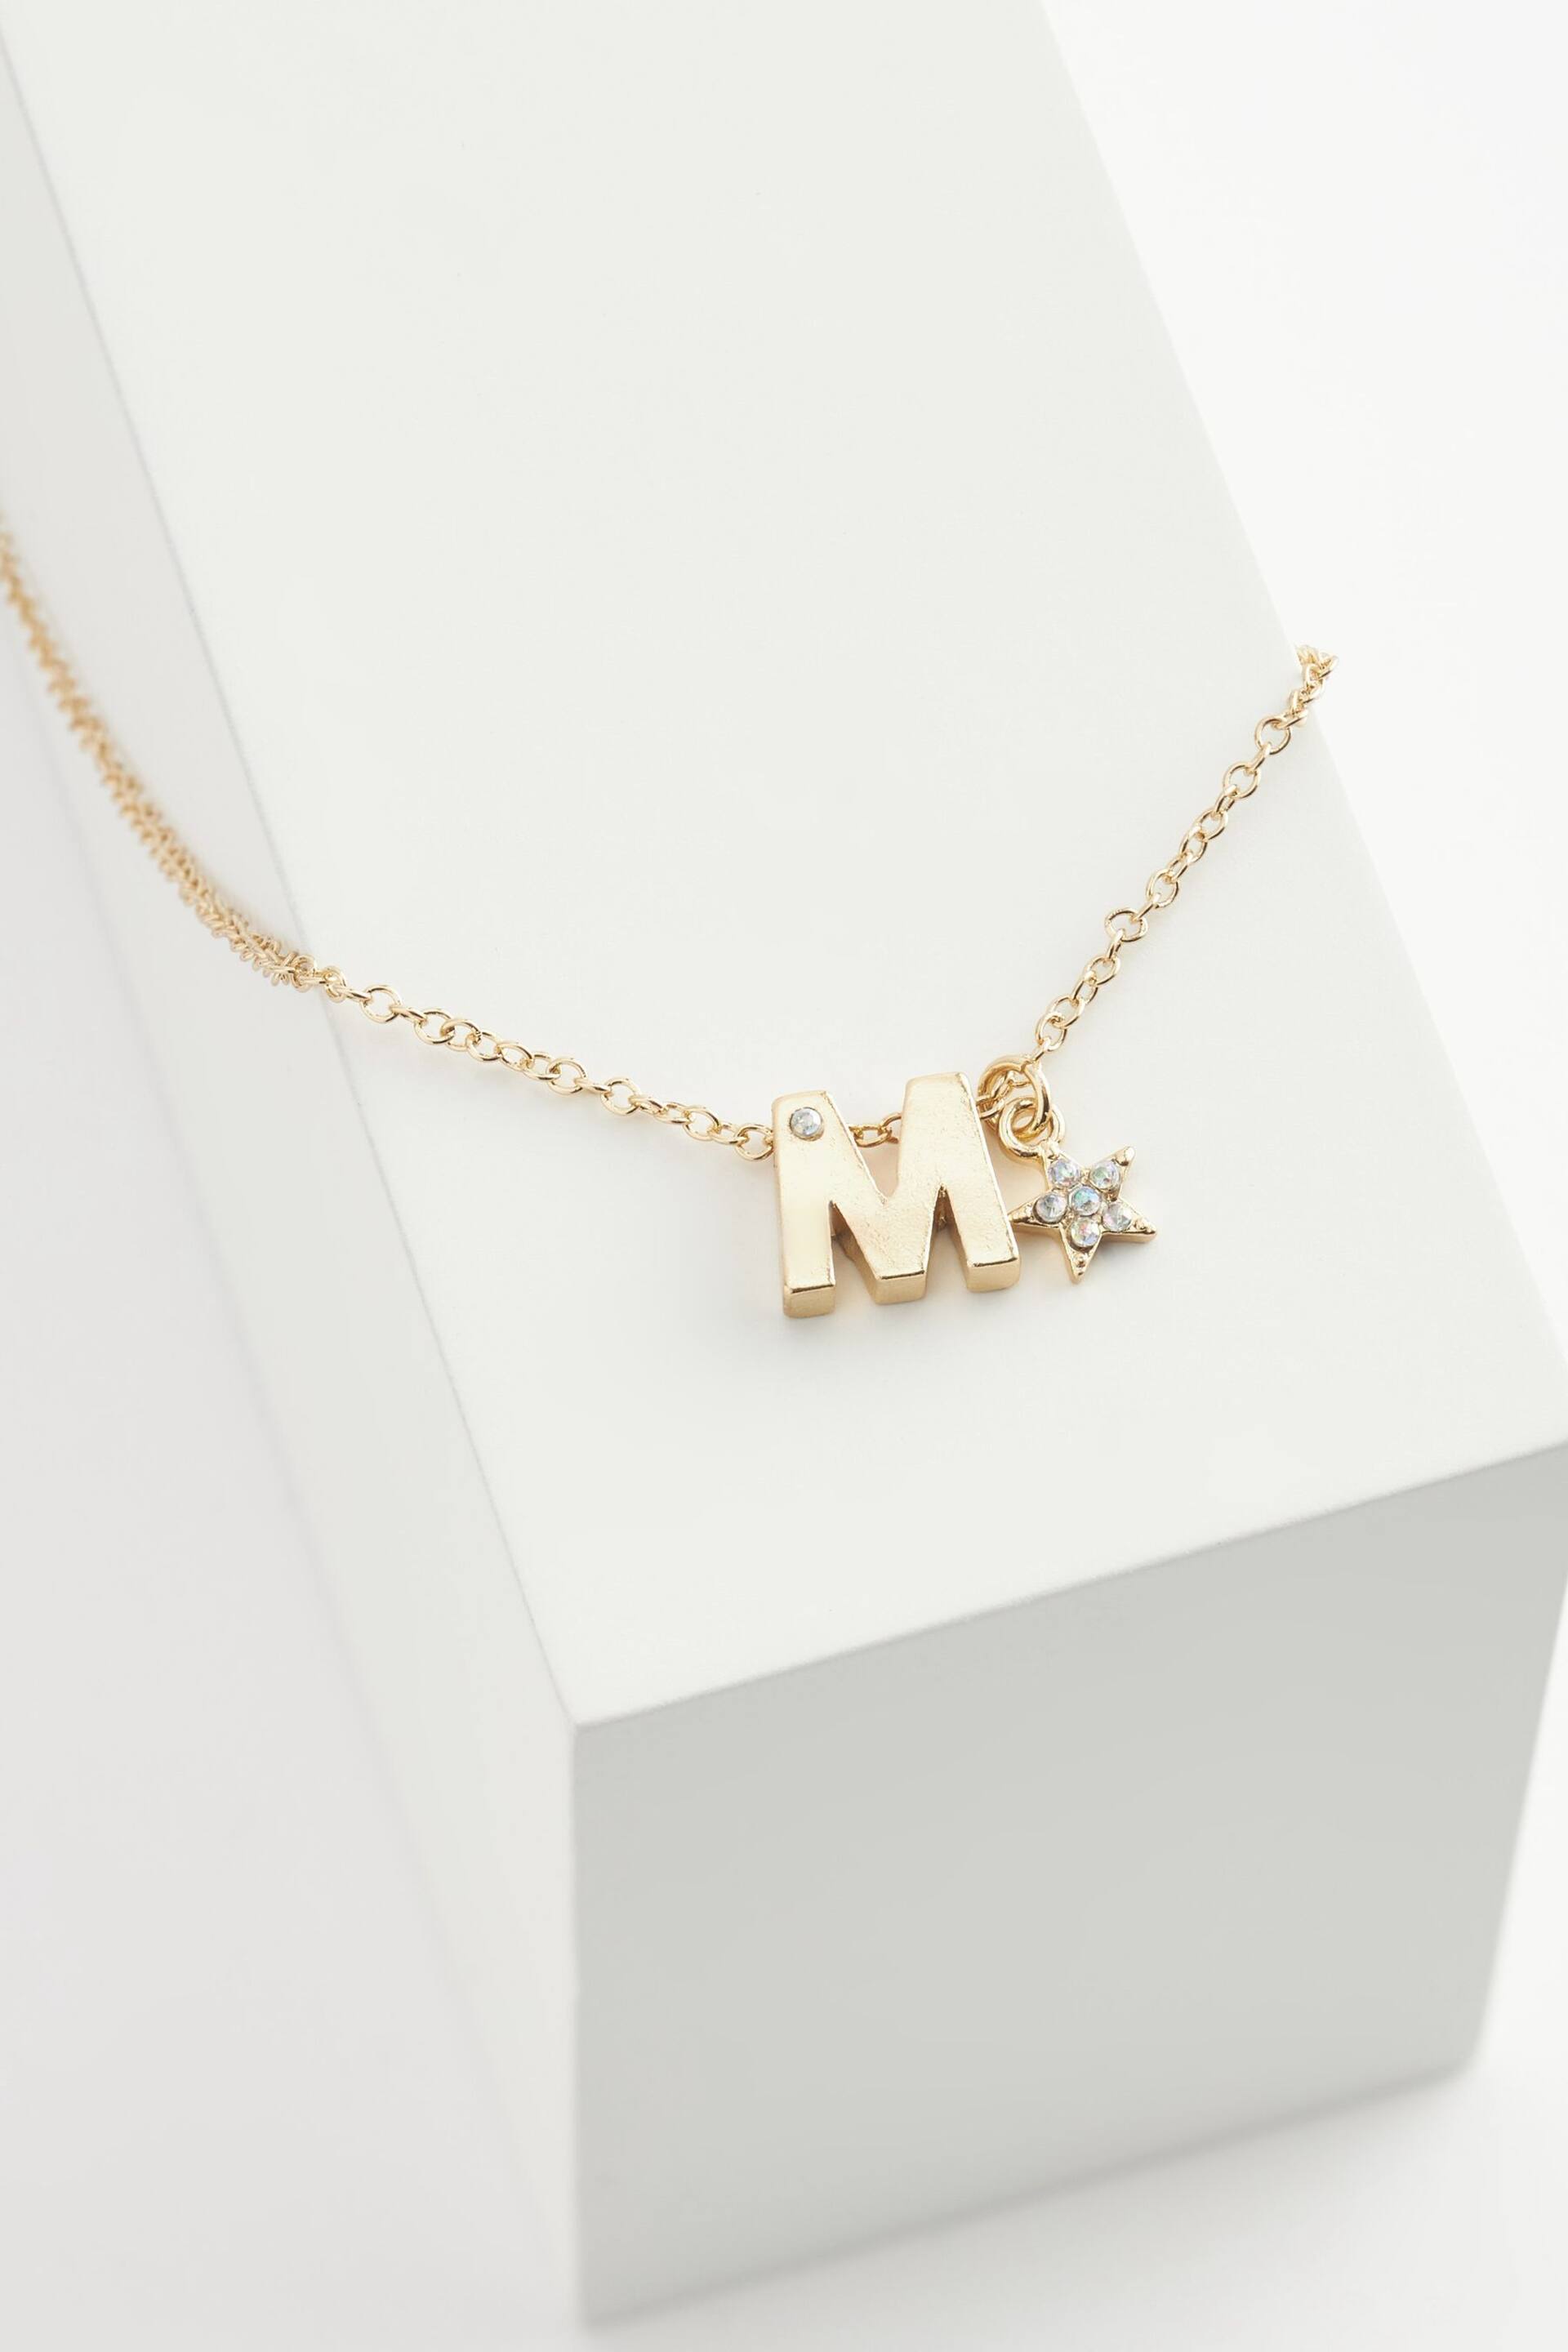 Gold Tone M Star Initial Necklace - Image 1 of 3